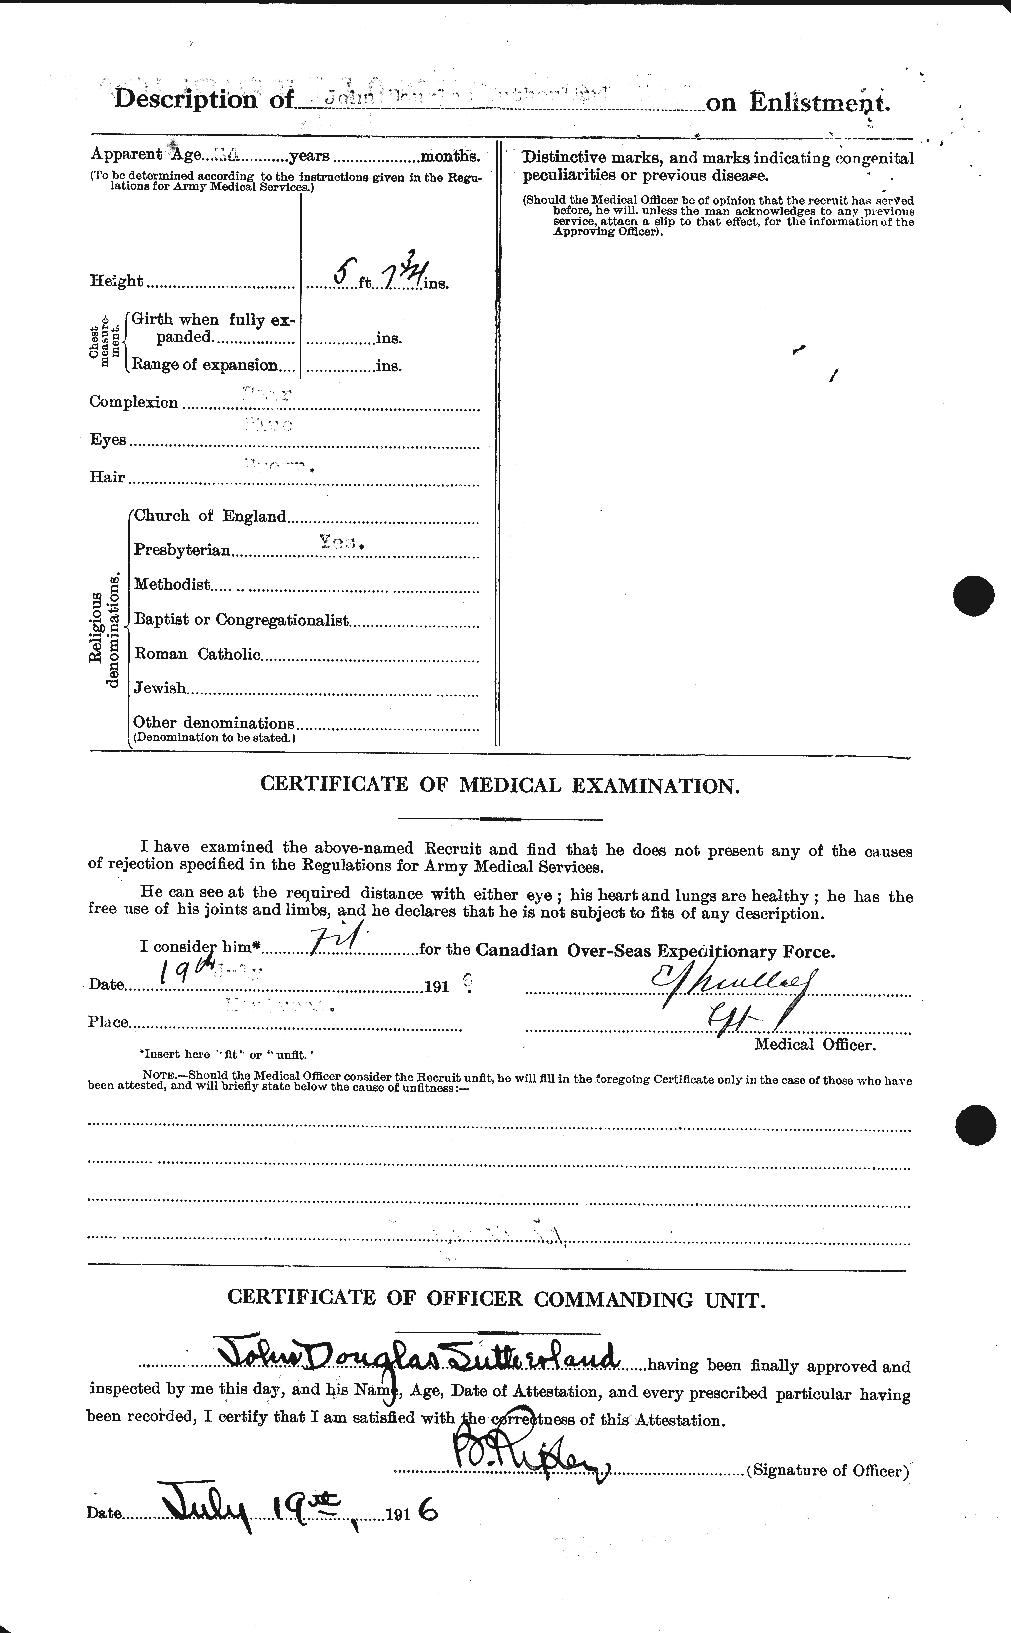 Personnel Records of the First World War - CEF 124696b